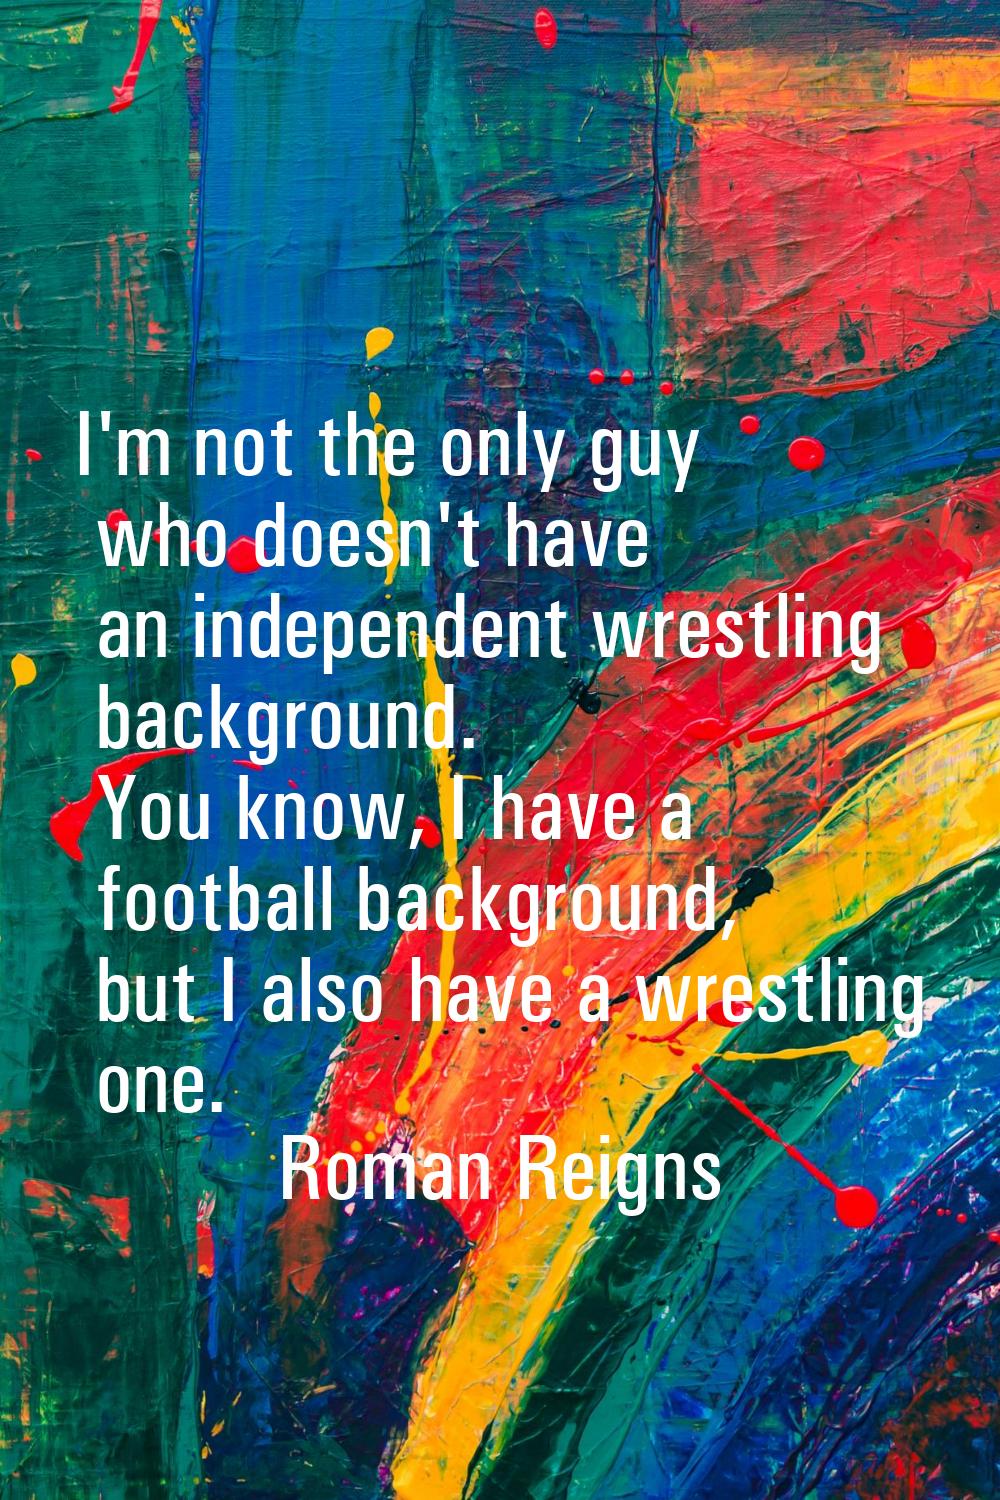 I'm not the only guy who doesn't have an independent wrestling background. You know, I have a footb